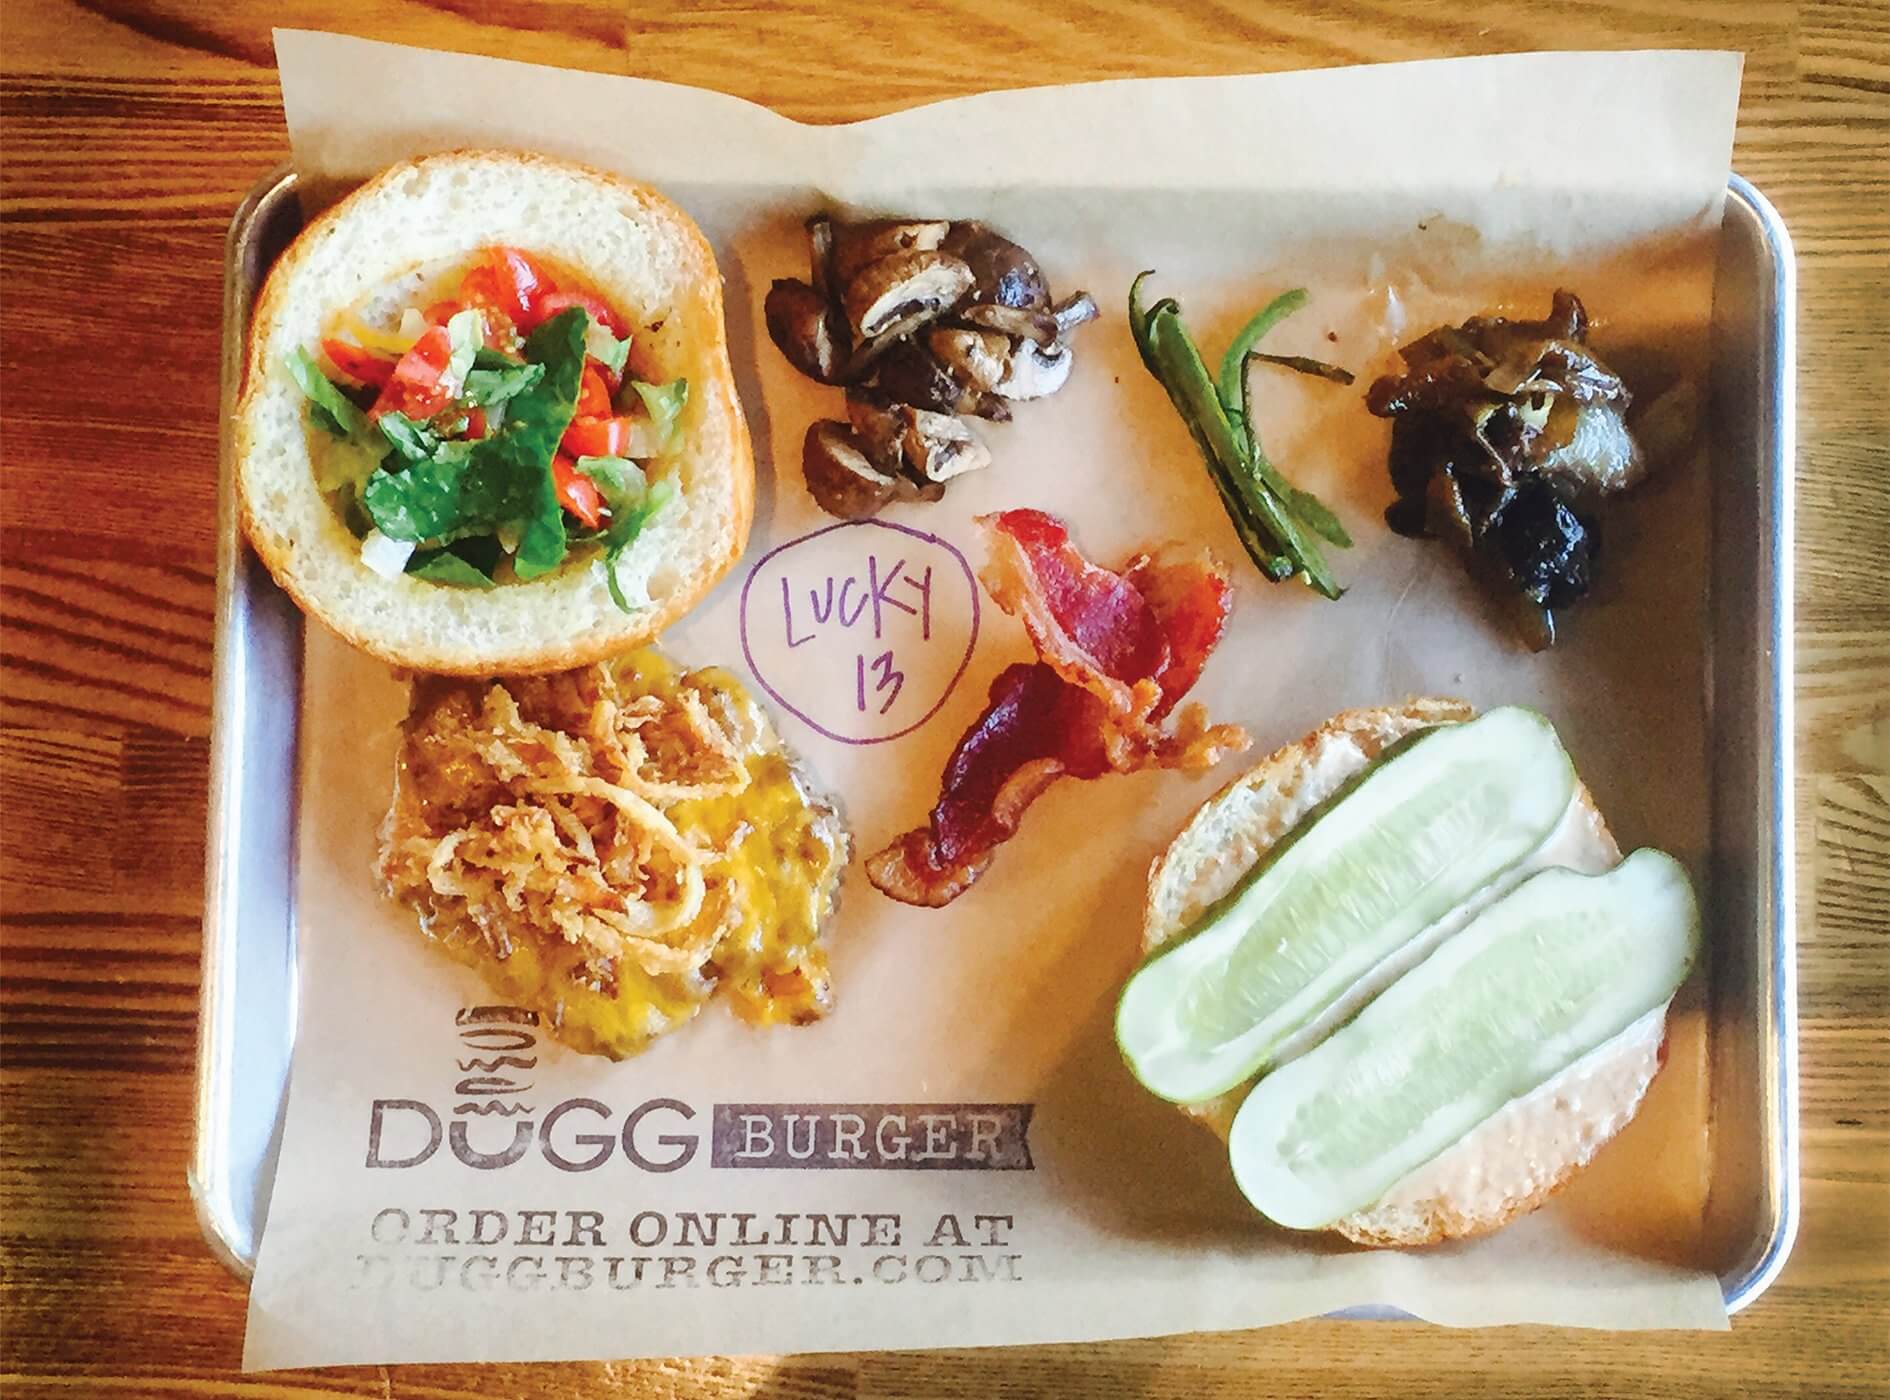 <span class="entry-title-primary">Digg In</span> <span class="entry-subtitle">Dugg Burger | Based in Dallas</span>